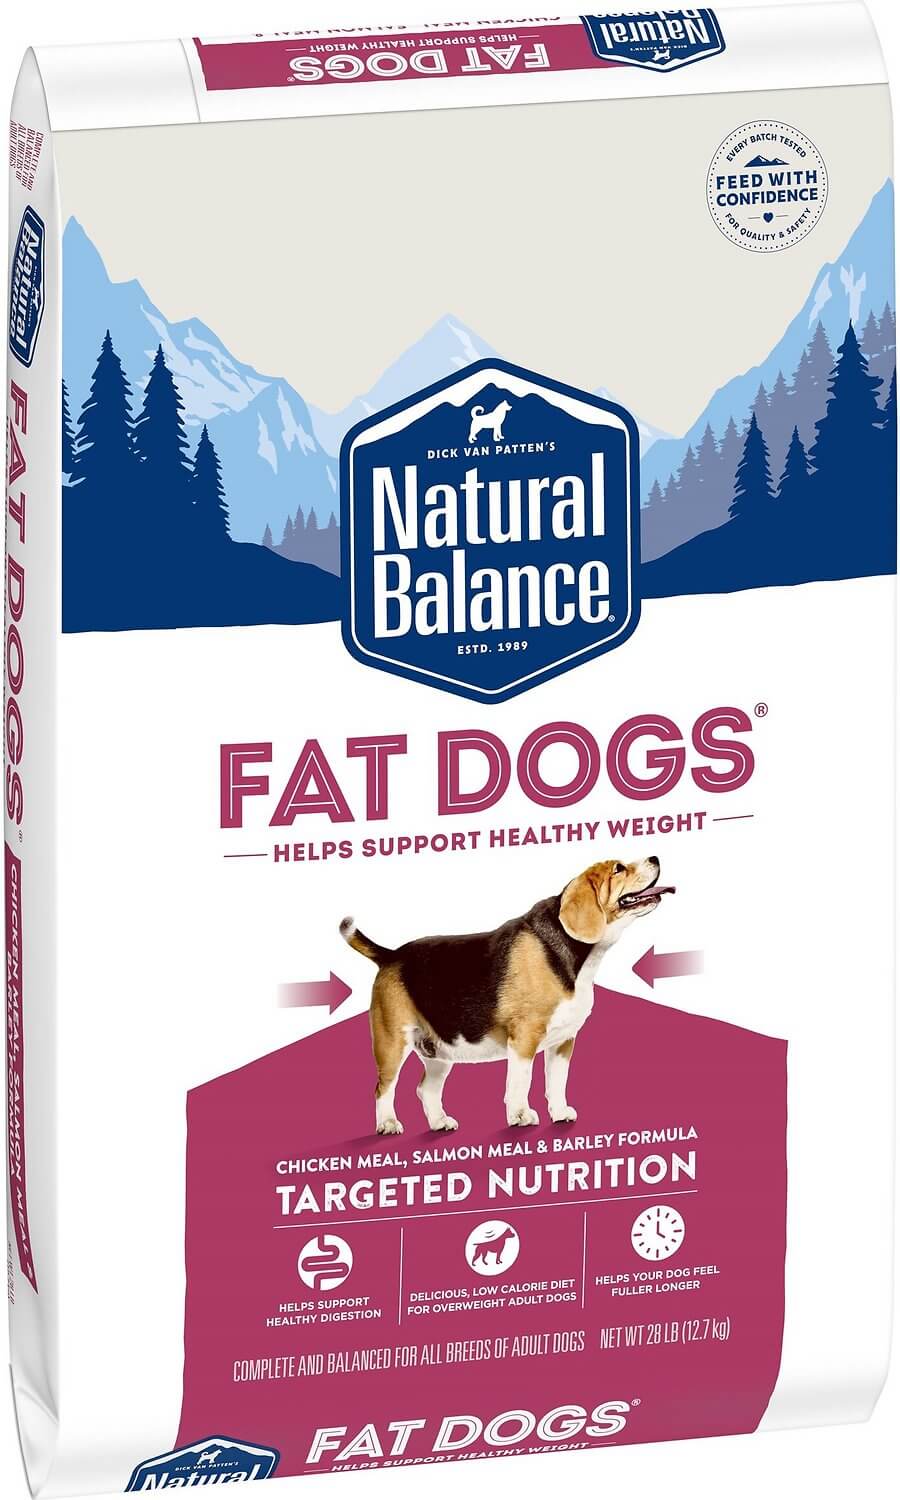 Natural Balance Fat Dogs - Best Dog Foods for Weight Loss